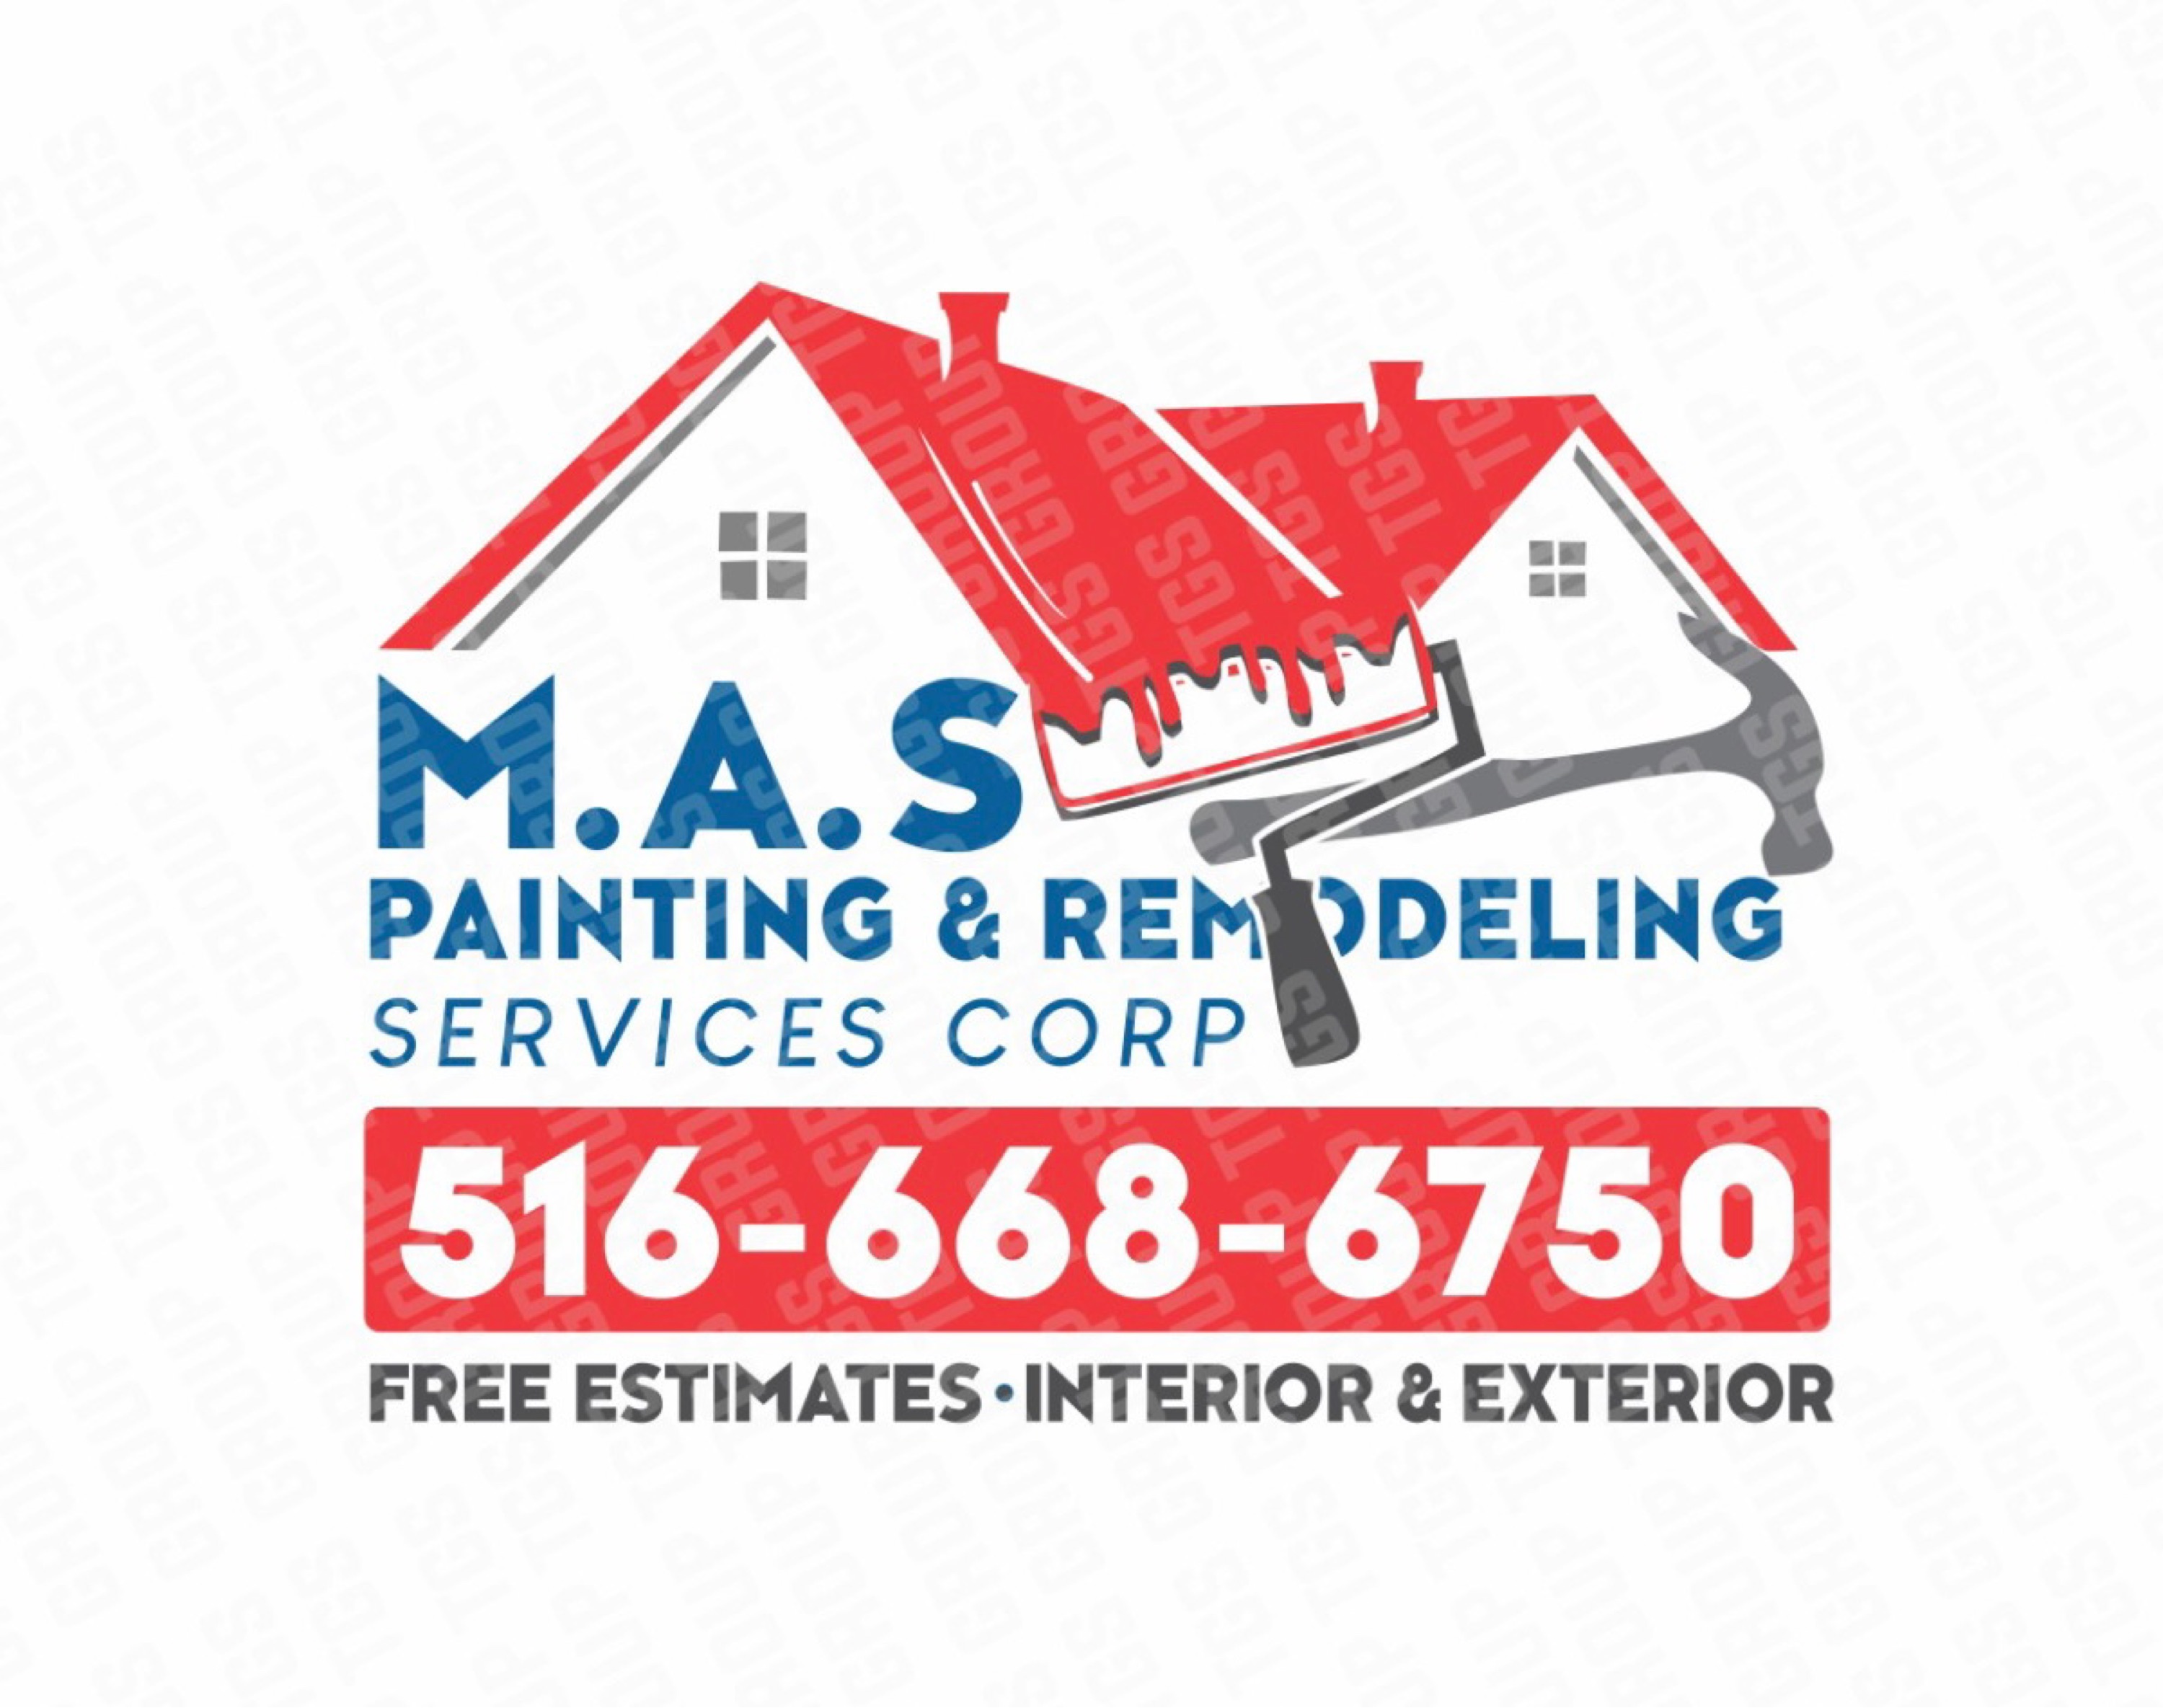 M.A.S. PAINTING & REMODELING SERVICES, CORP. Logo